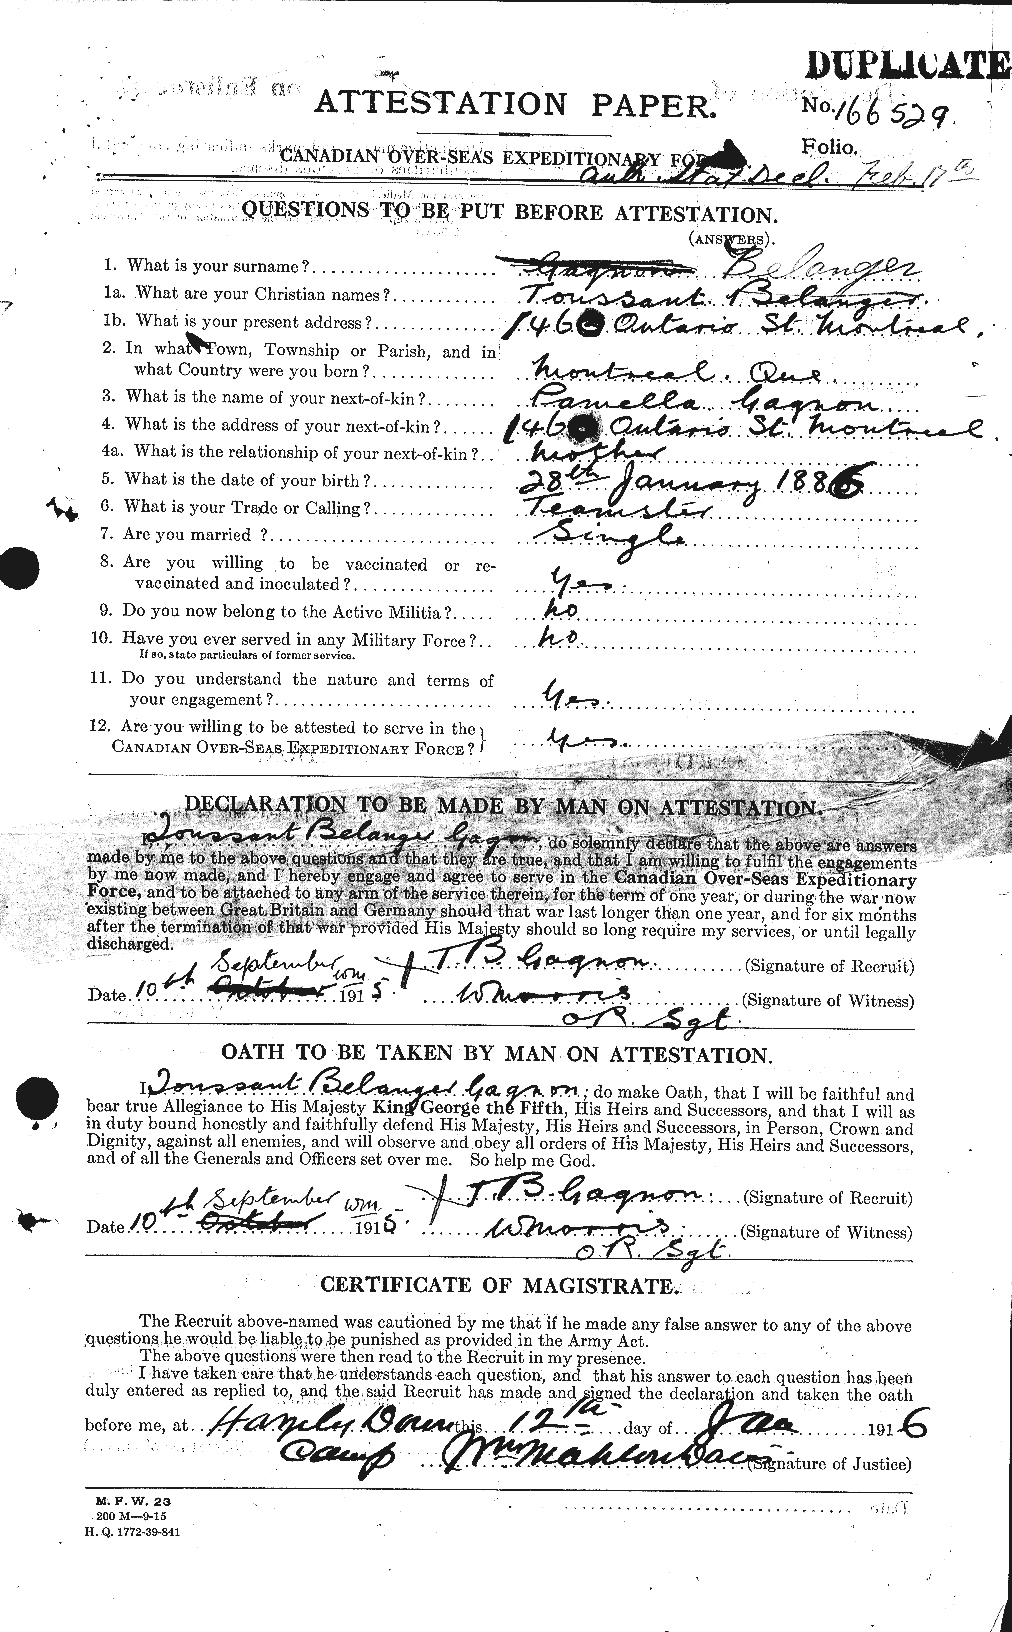 Personnel Records of the First World War - CEF 232656a